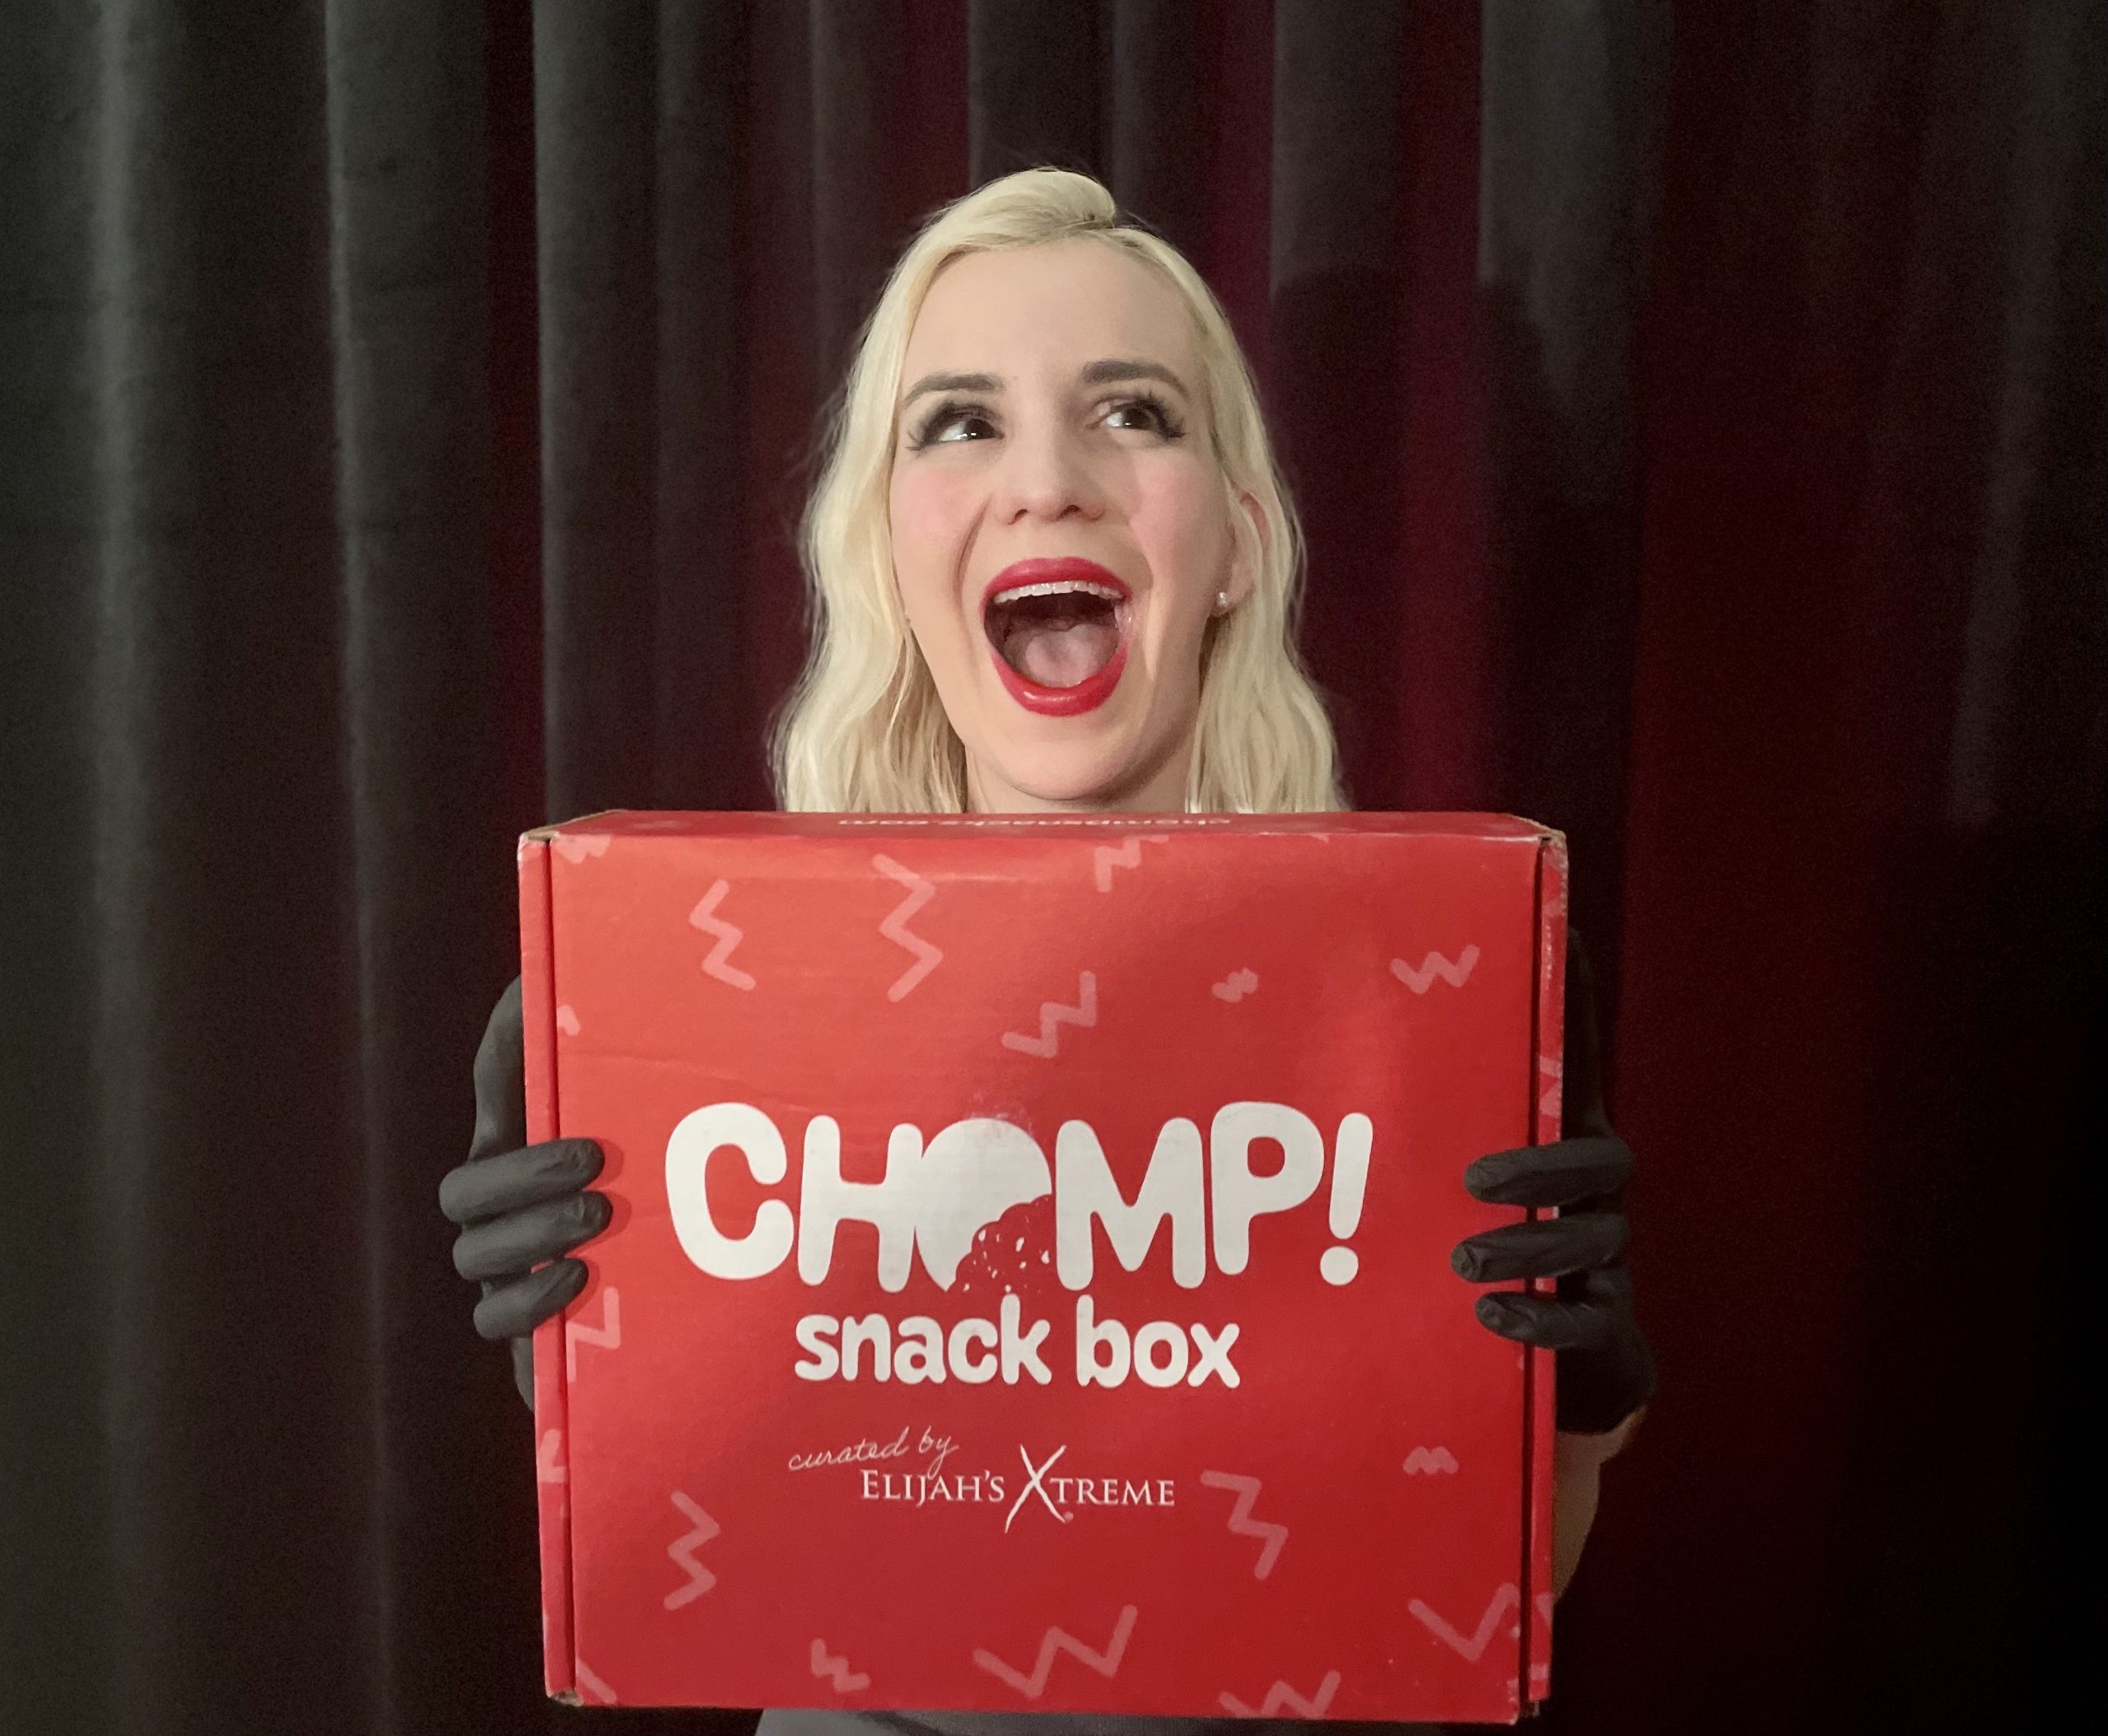 Chomp Snacks Curated by Elijah’s Xtreme! – Alexandria Takes a Look at the Spicy Goodies!